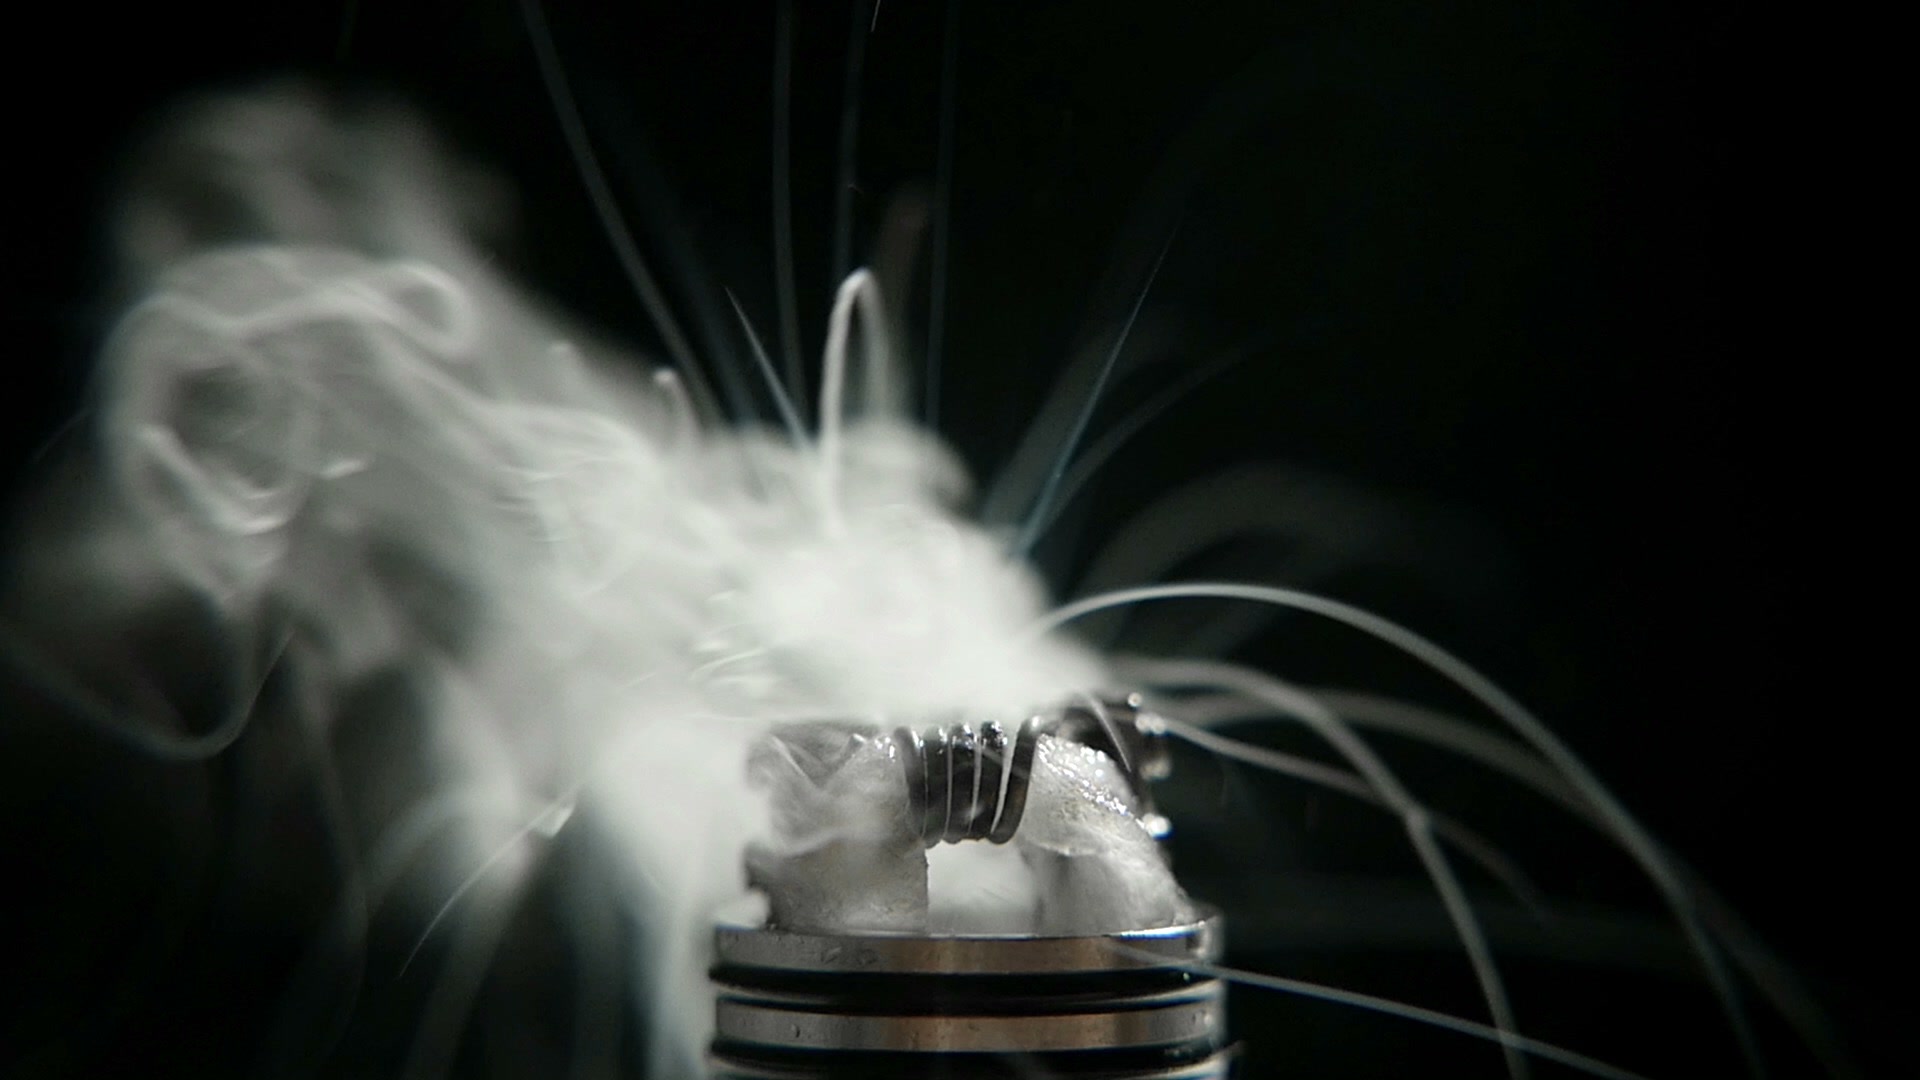 Video Working Of Micro Coil In Rda Base Close Up Slow Motion